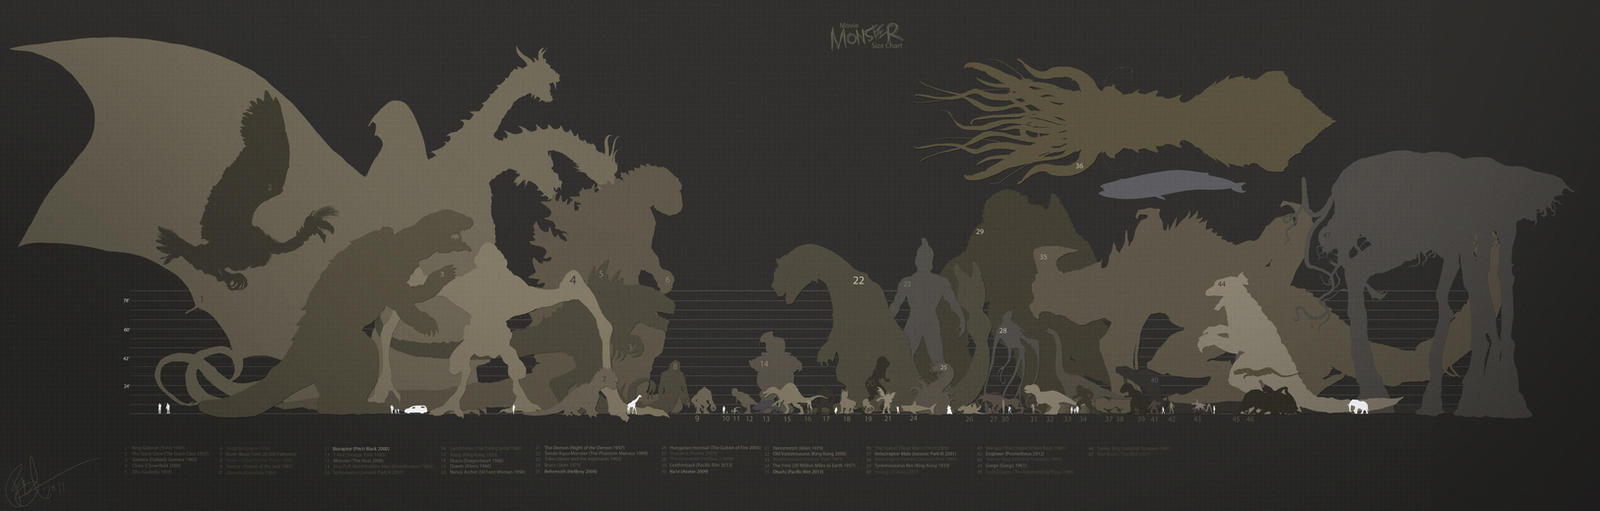 movie_monster_size_chart_by_lord_phillock-d47yzw8.jpg